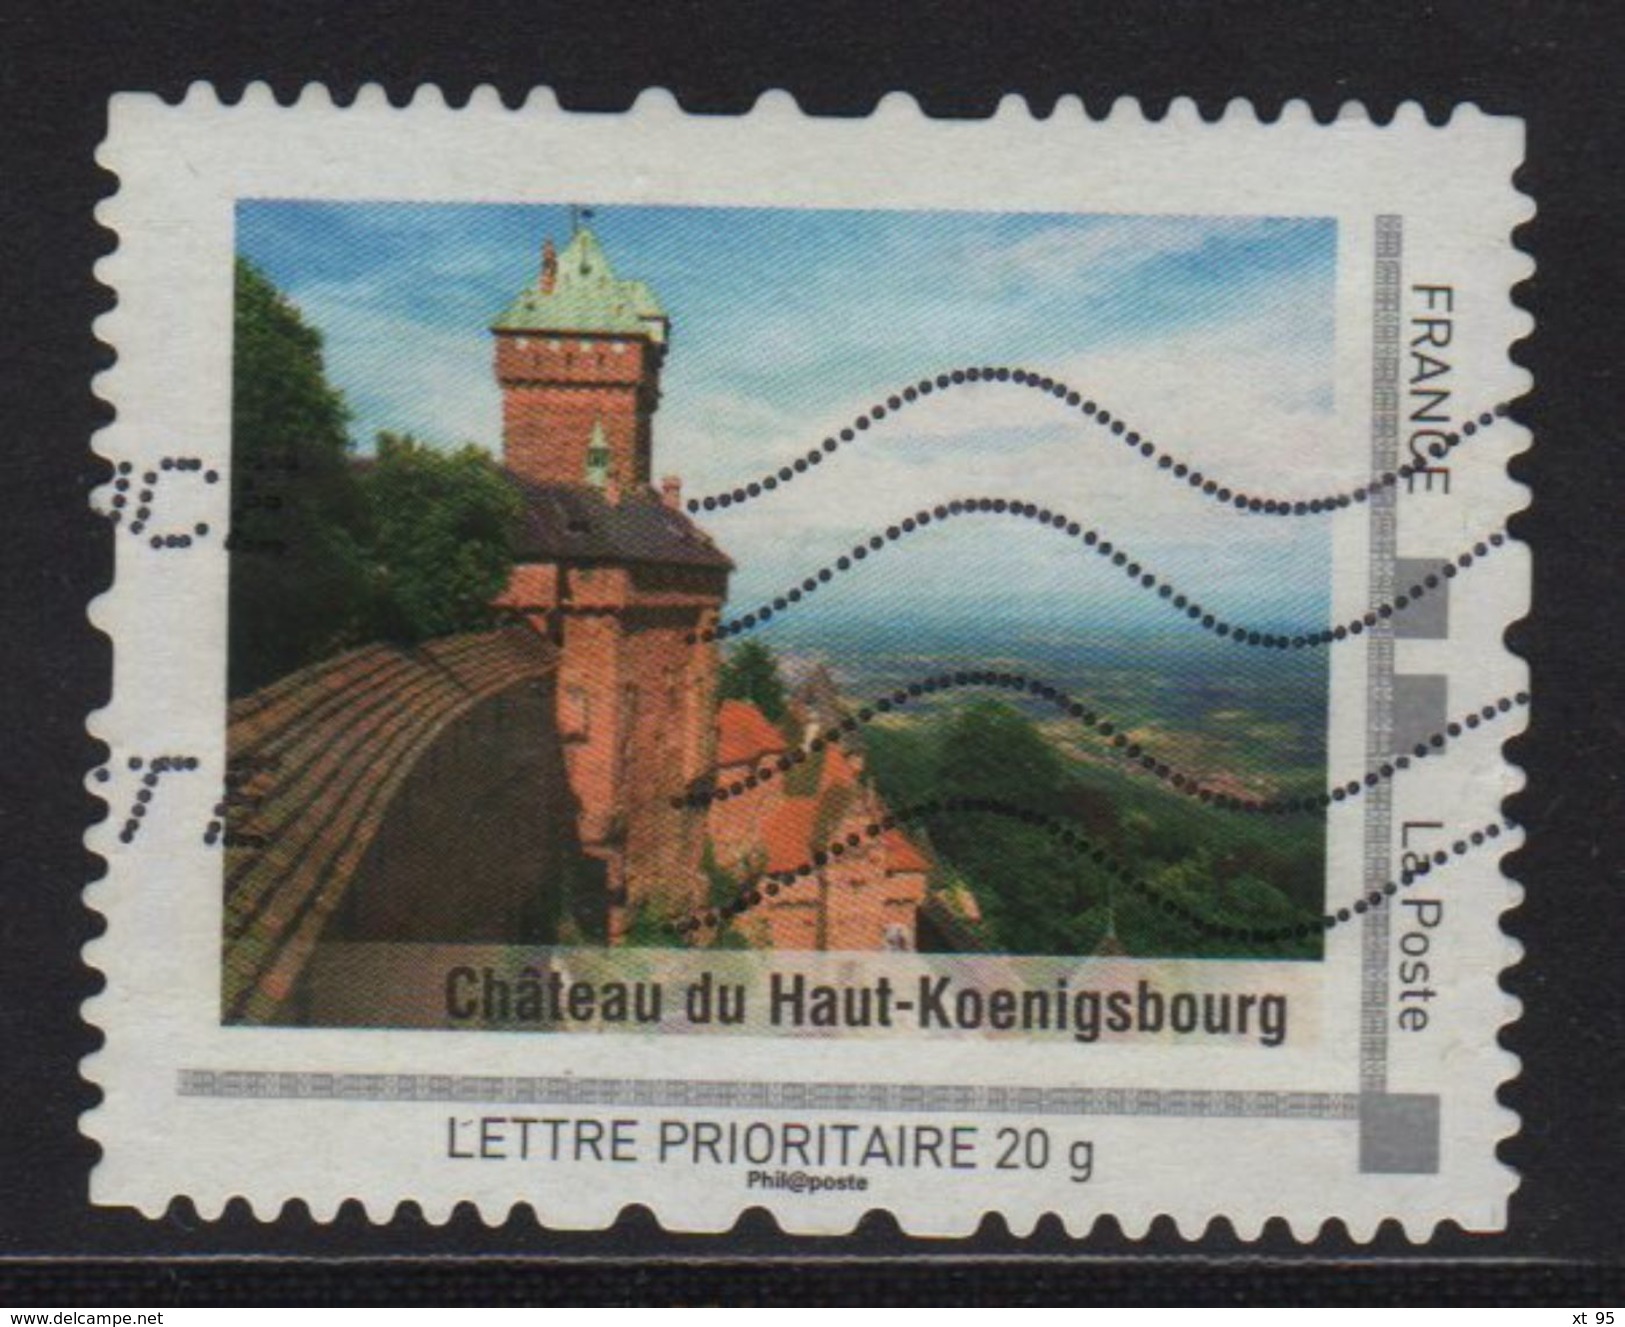 Timbre Personnalise Oblitere - Lettre Prioritaire 20g - Chateau Du Haut Koenigsbourg - Used Stamps